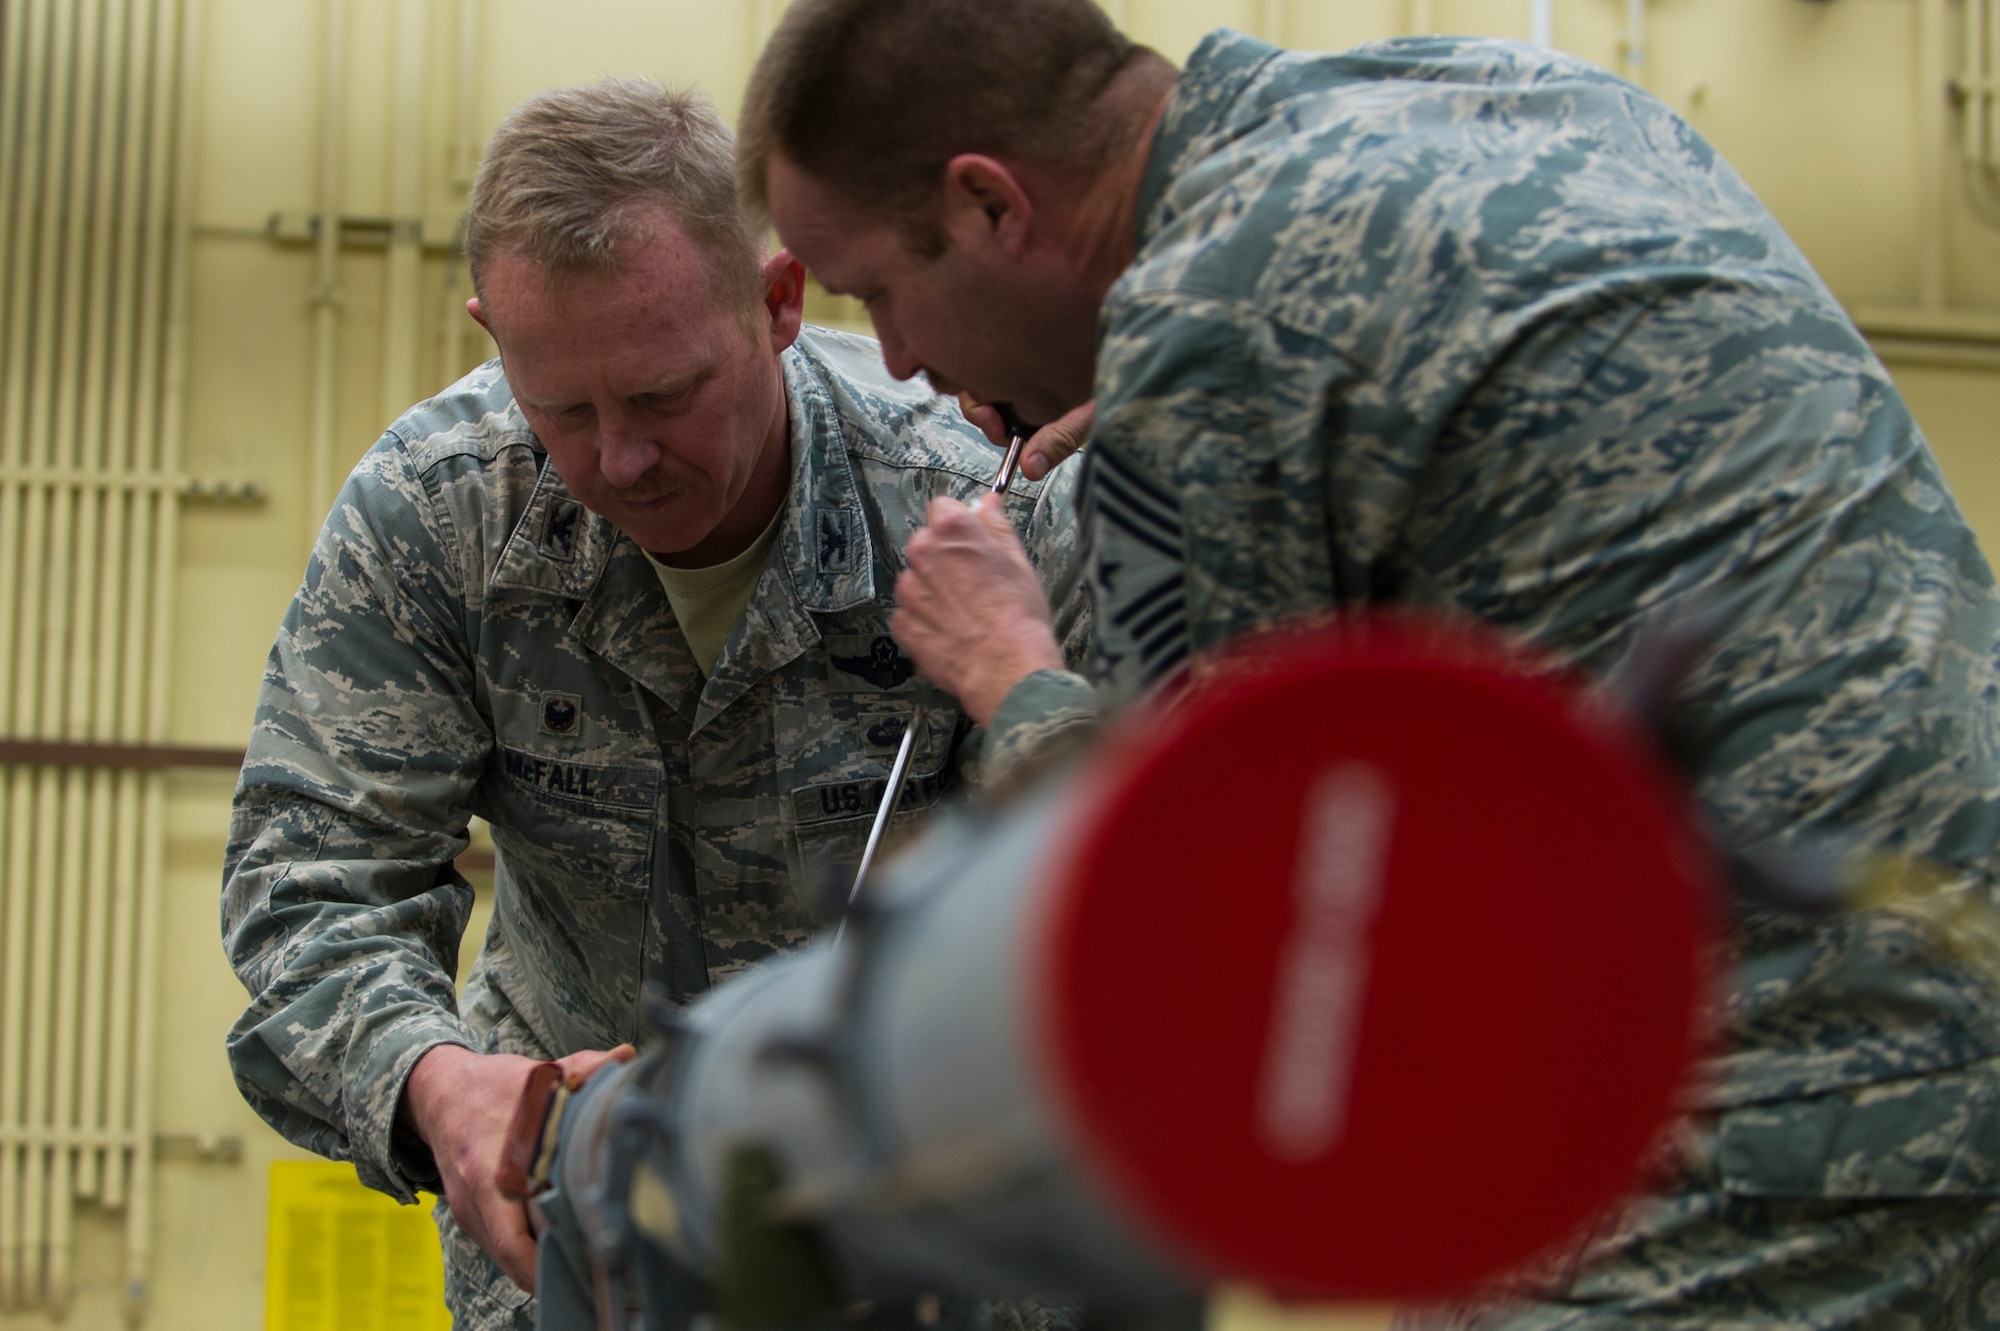 U.S. Air Force Col. Joseph McFall, 52nd Fighter Wing command and Chief Master Sgt. Edwin Ludwigsen, 52nd FW command chief, build an Air Intercept Missile 9 during a Saber leadership “out and about” event at Spandgdahlem Air Base, Germany, March 27, 2017. The 52nd Maintenance Squadron munitions section provides all explosives to the 52nd FW to include missiles, guided bombs, 20 mm gun ammo, chaff/flare, countermeasures and practice bomb dummy unit 33 bombs.(U.S. Air Force photo by Senior Airman Dawn M. Weber)